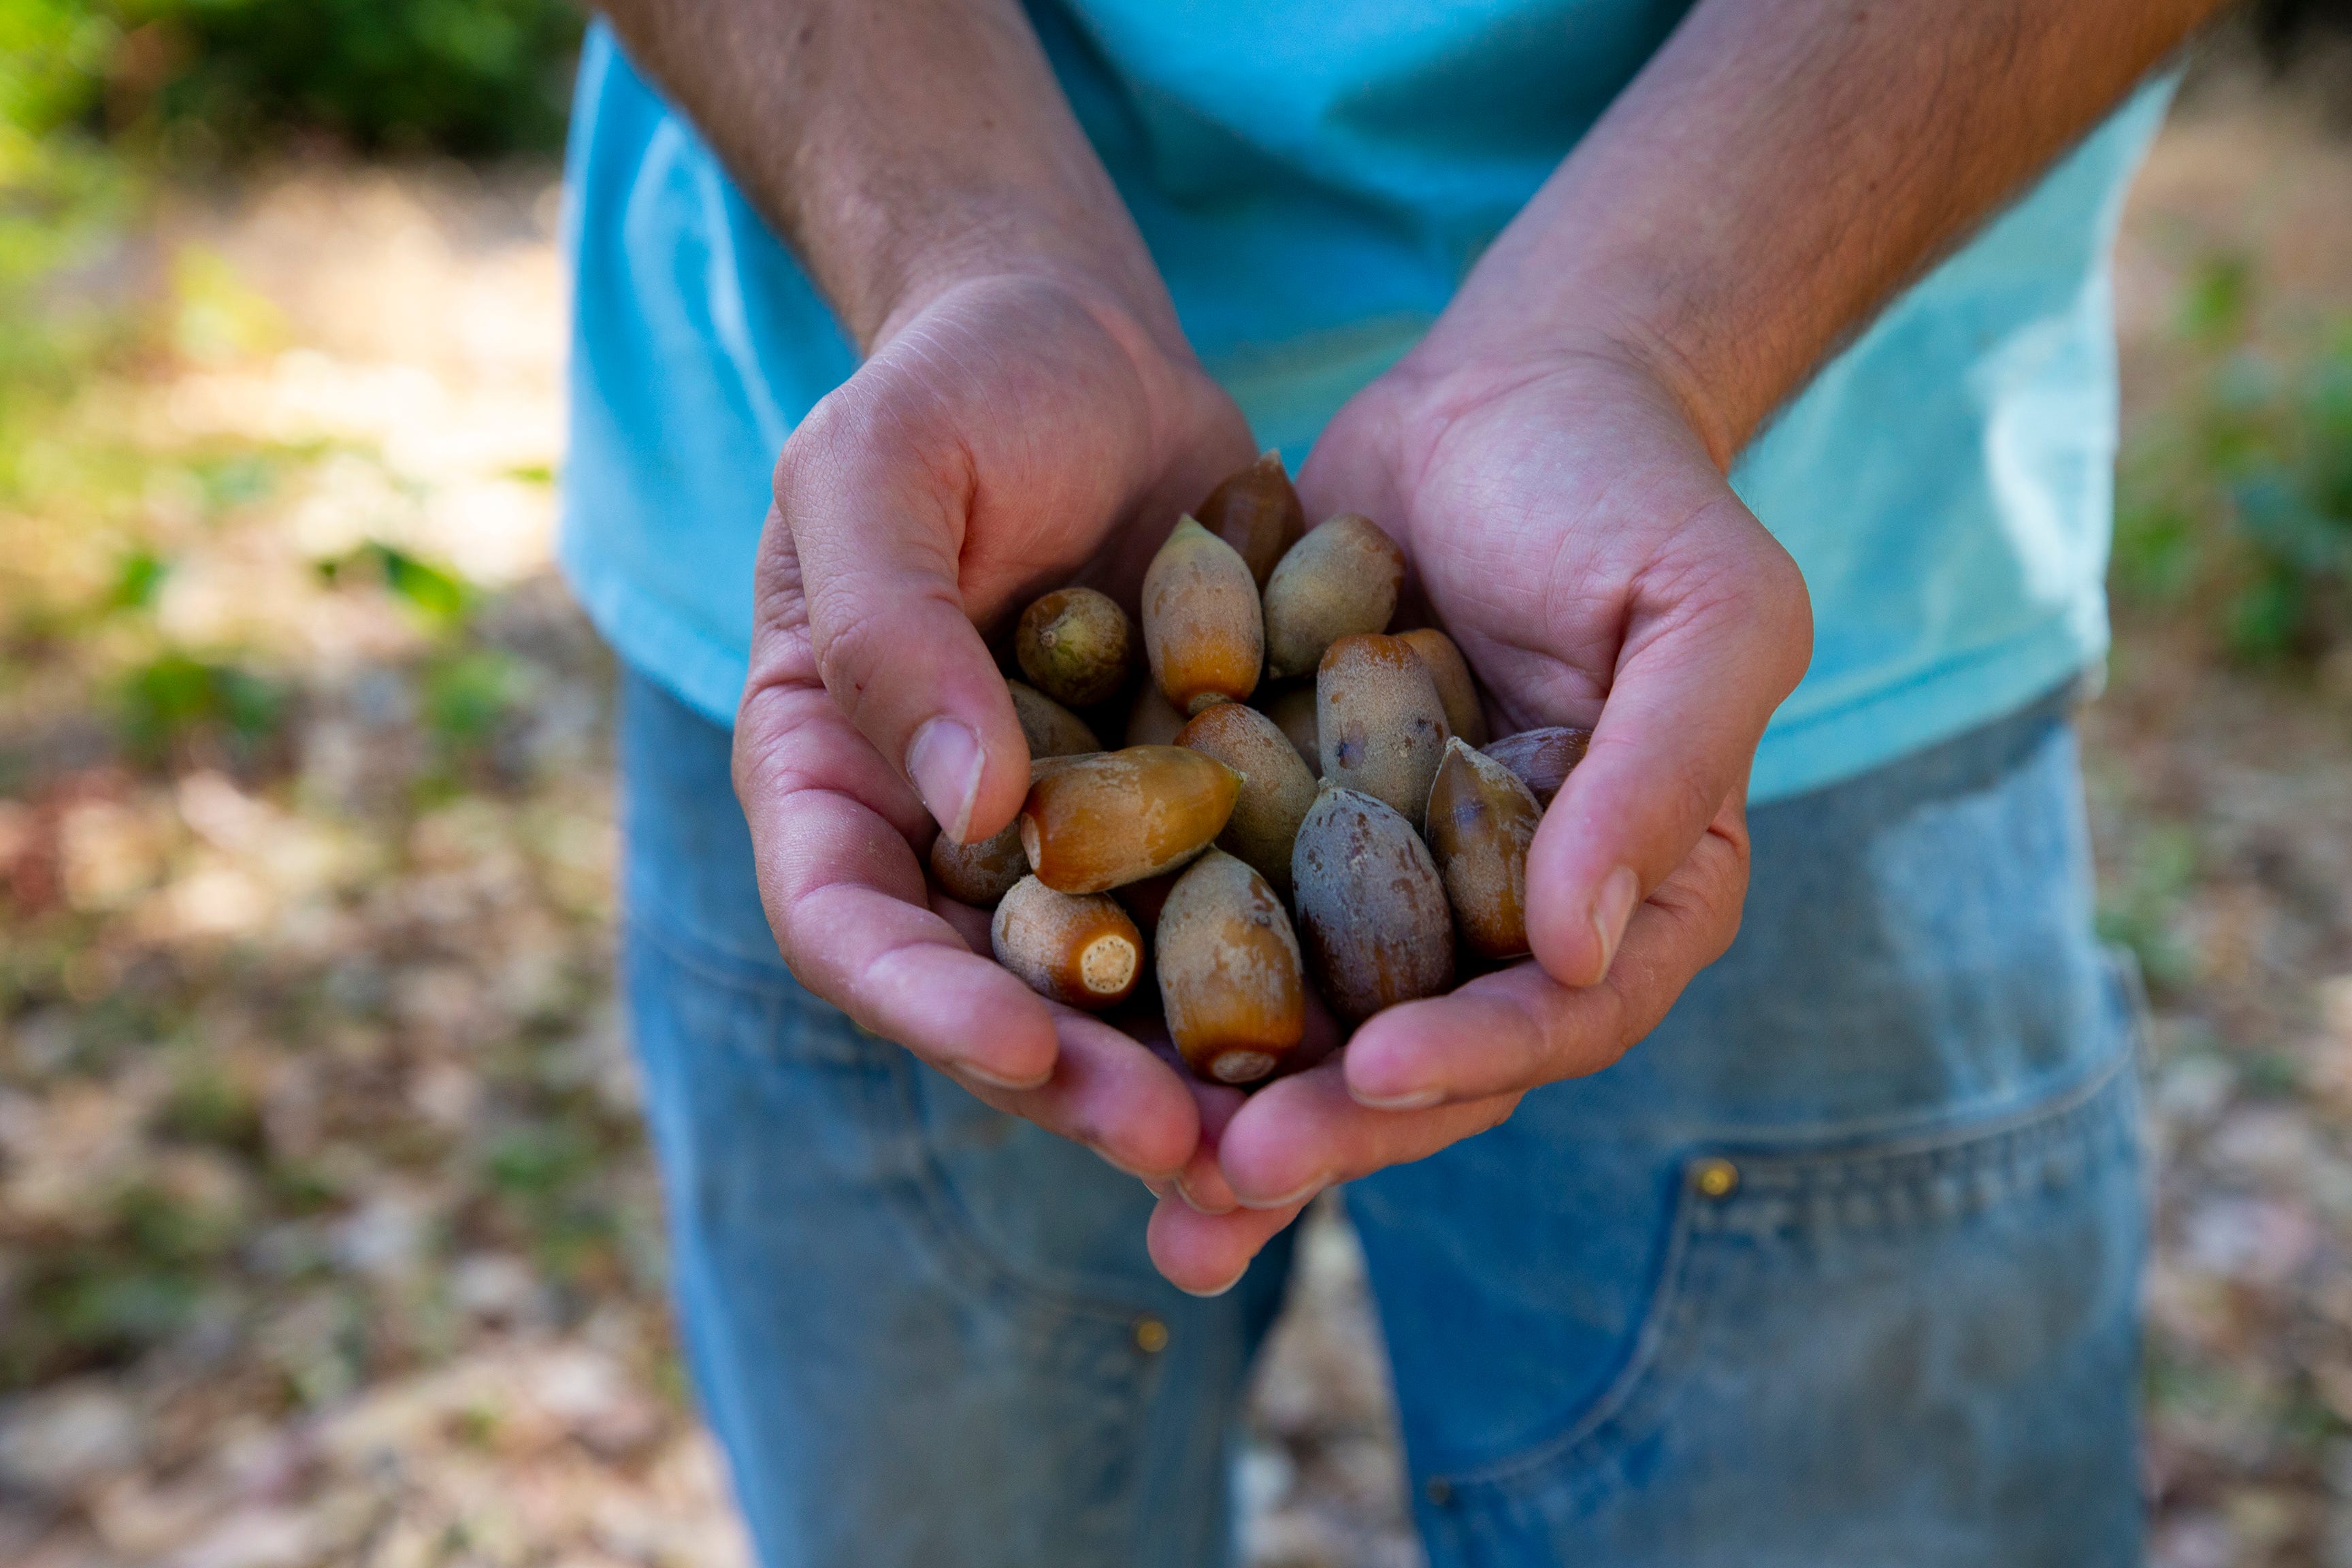 Chook Chook Hillman, Karuk cultural resources technician, picks up acorns from his property in Orleans, California. Hillman talks about not owning the Earth but owning responsibilities to the Earth.